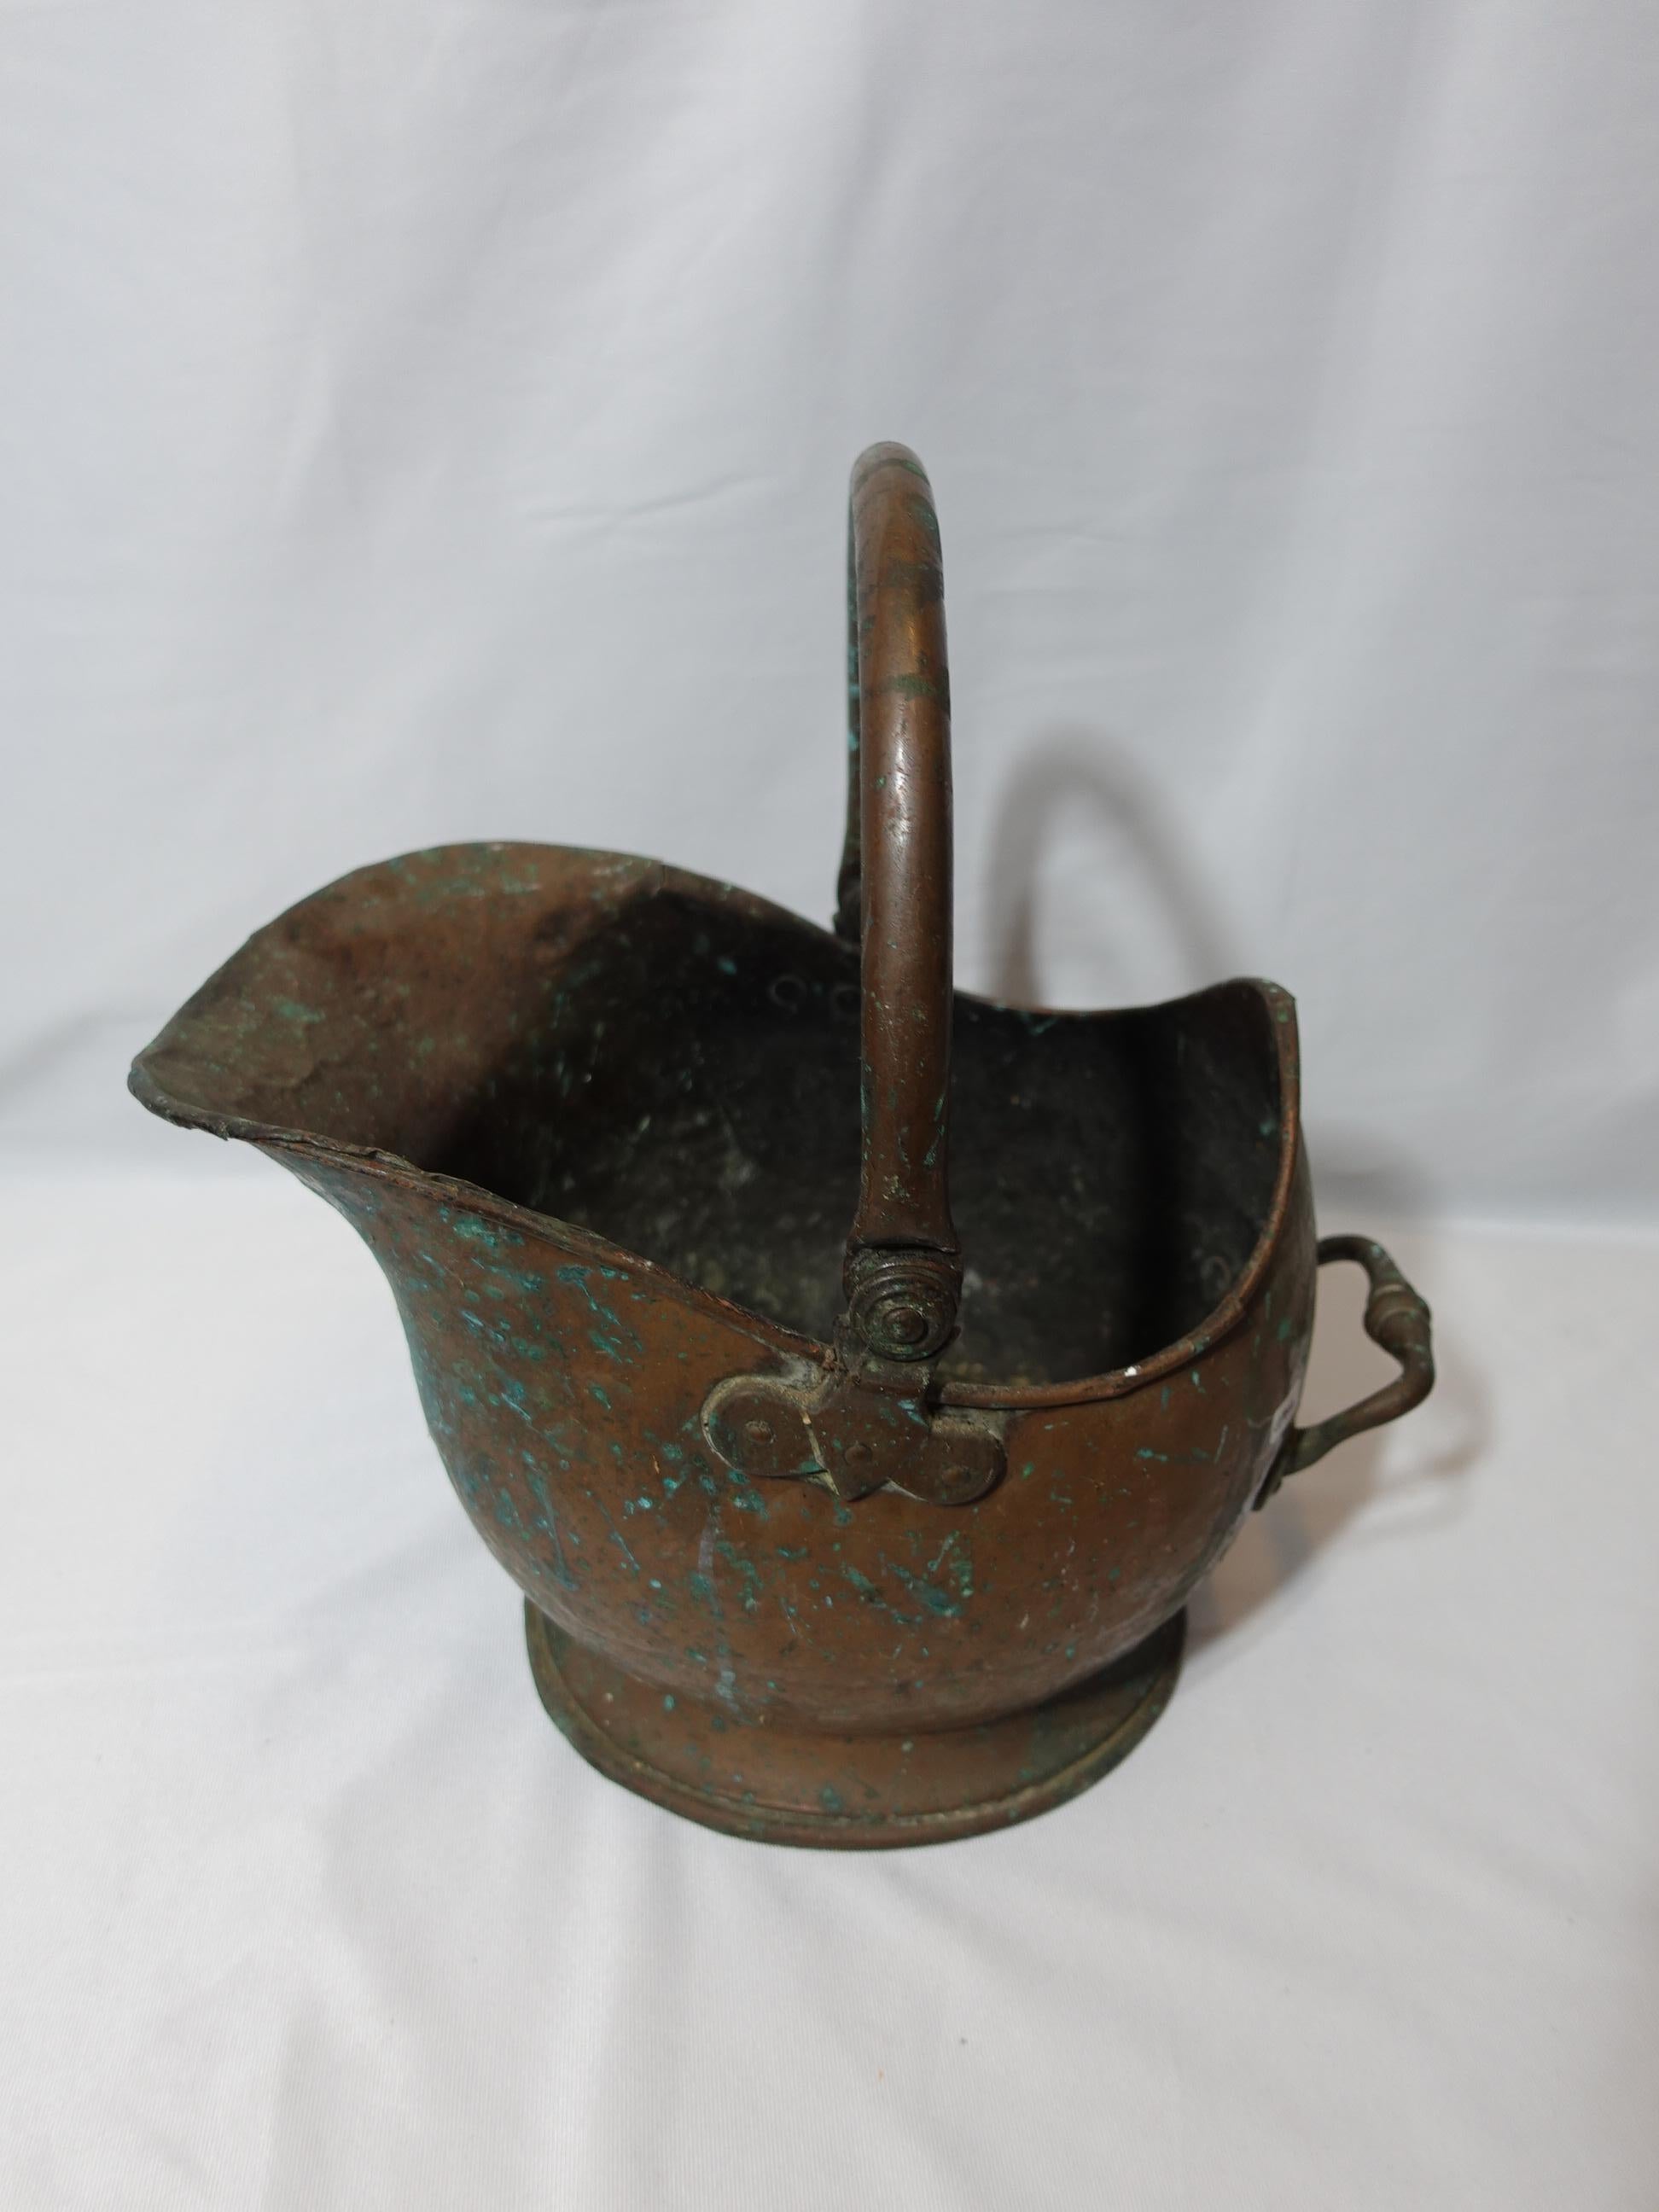 Antique Hand Hammered copper coal scuttles with handles on top and side. CO#006.
It's an old piece from the 19th century
